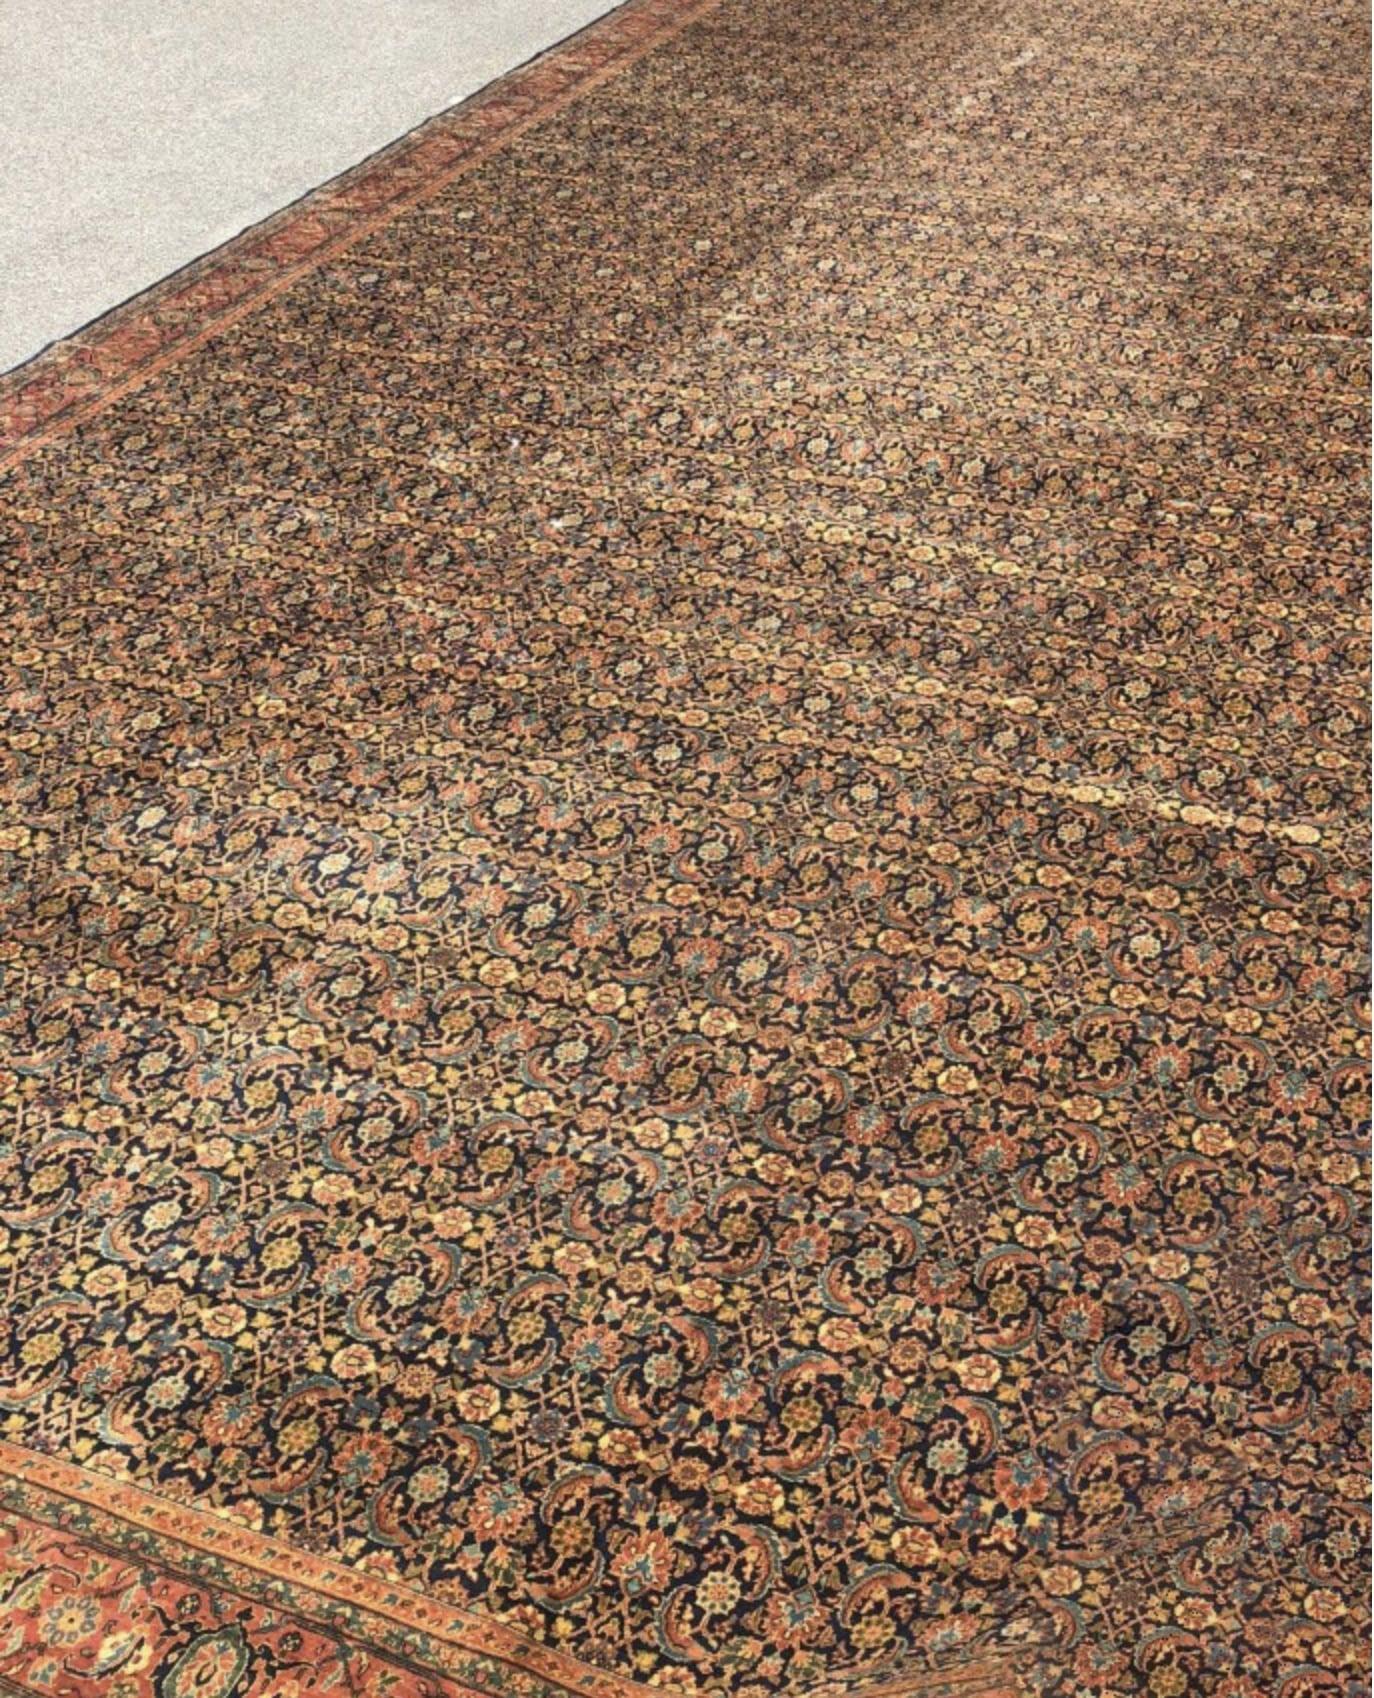 Sarouk rugs come from west central Persia. On a navy field and rust border this rug expresses strength and style with its detailed floral designs scattered over the entire piece creating a wonderful visual setting wherever it will be placed.